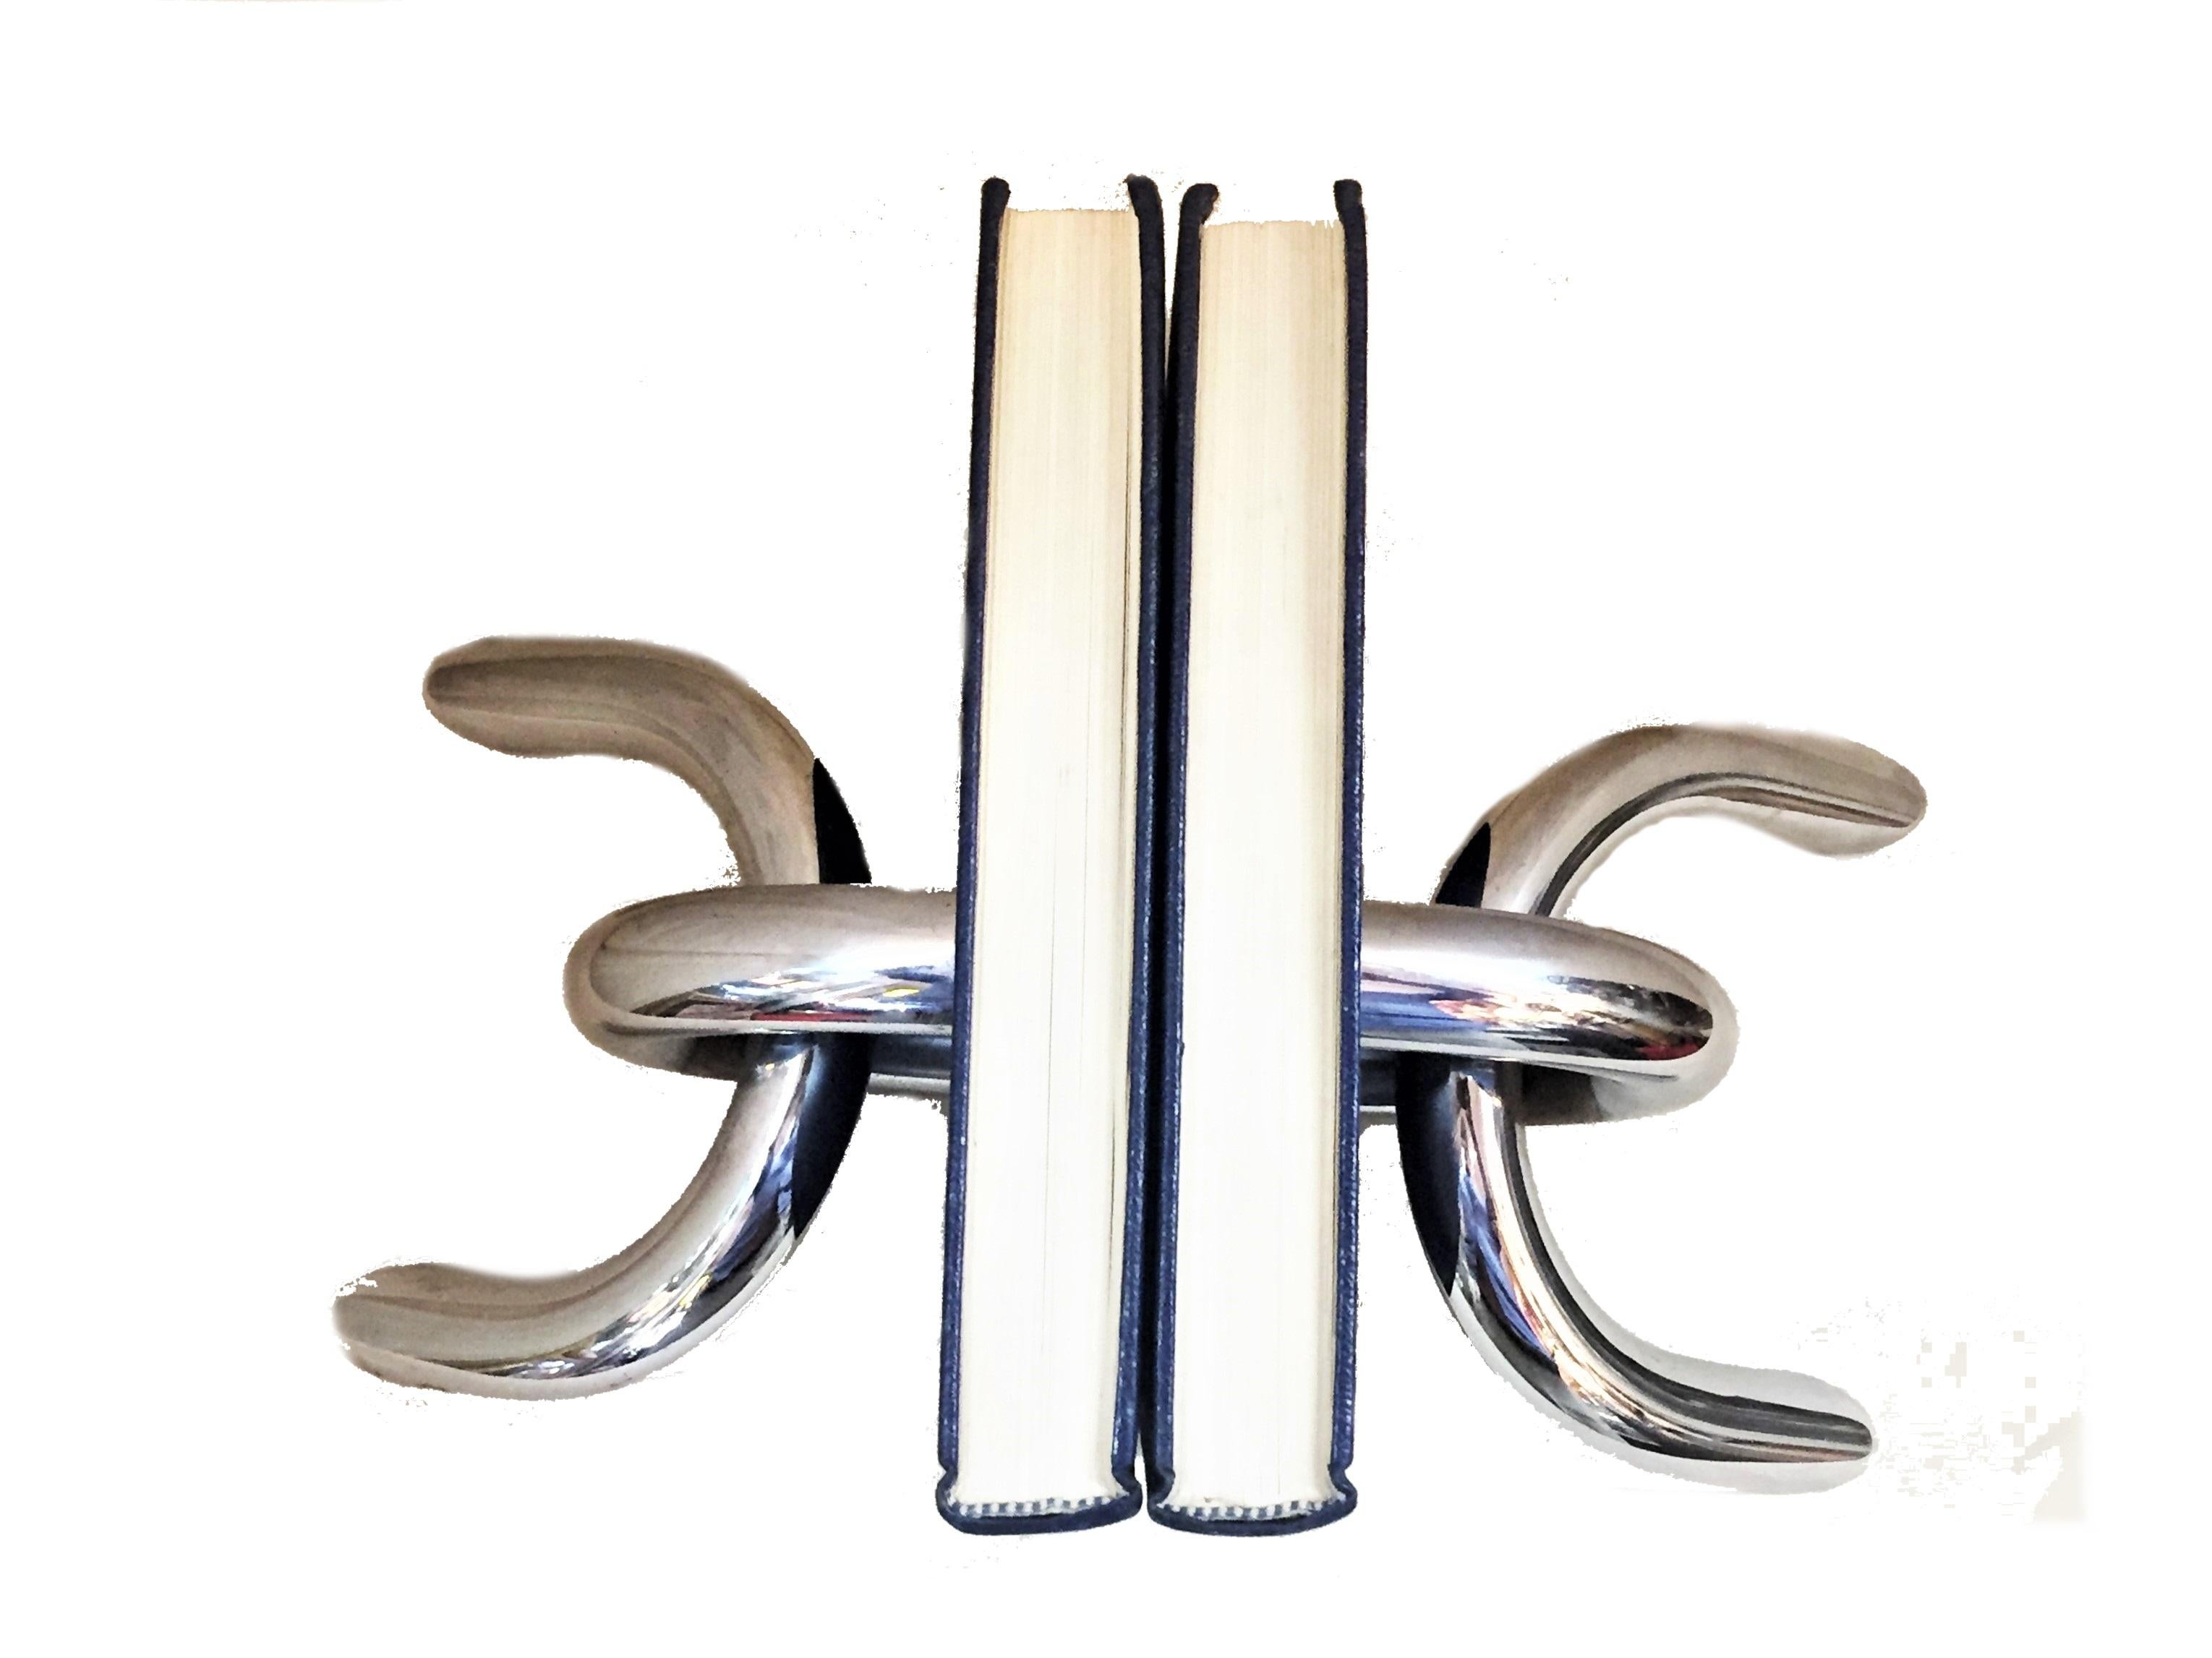 Stainless Steel Pair of Italian Architectural Chromed Steel Chain Links Bookends, circa 1970 For Sale